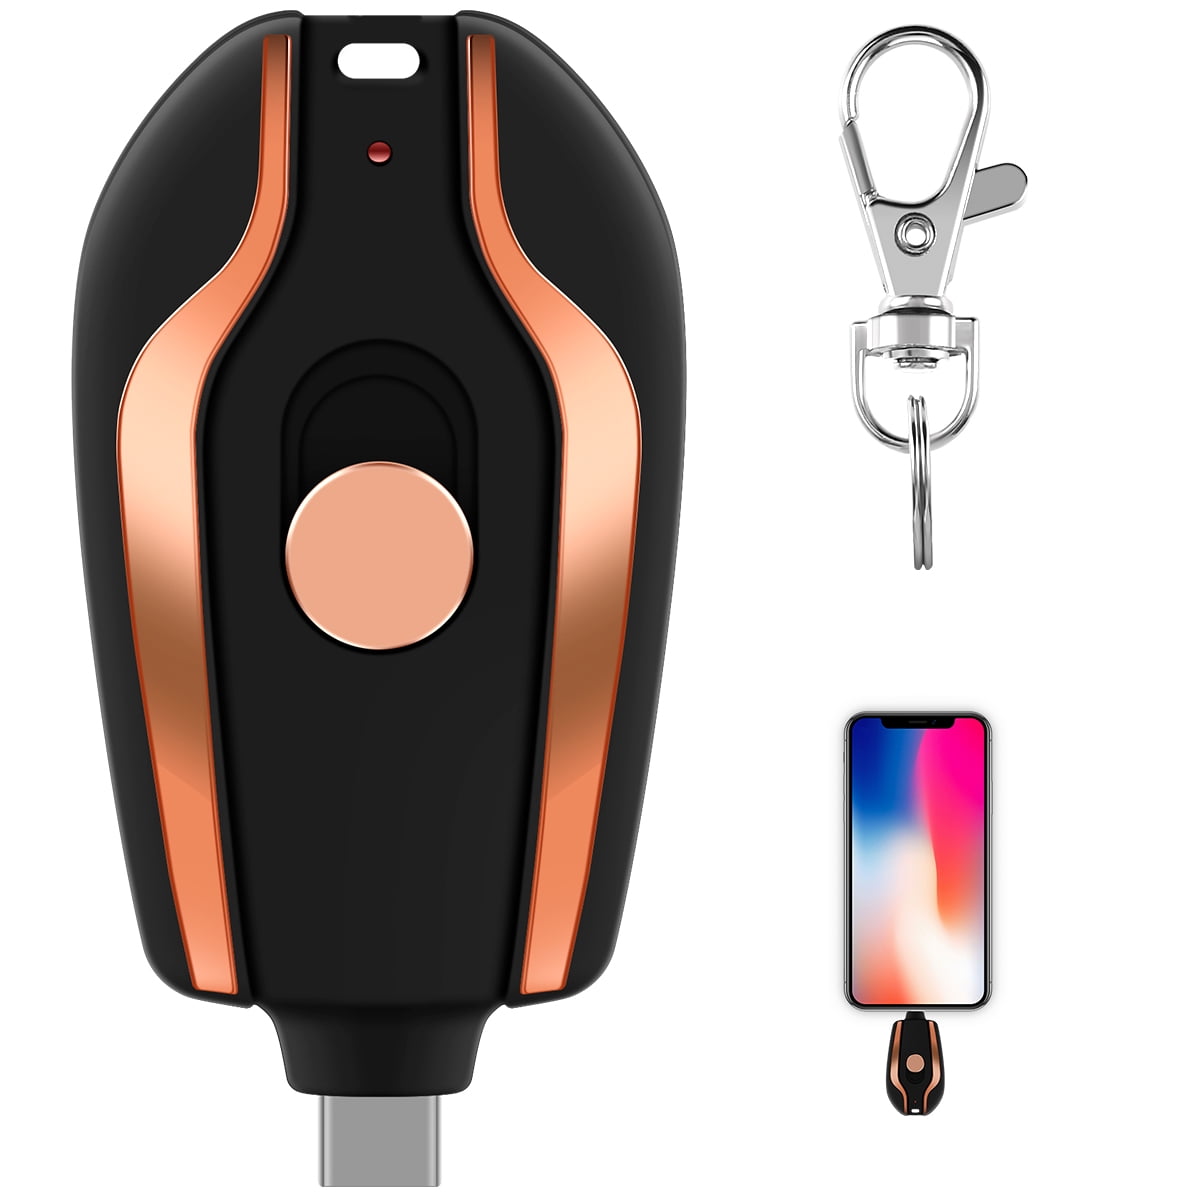 Tiny Key Ring Sized Cell Phone Charger Now Launched